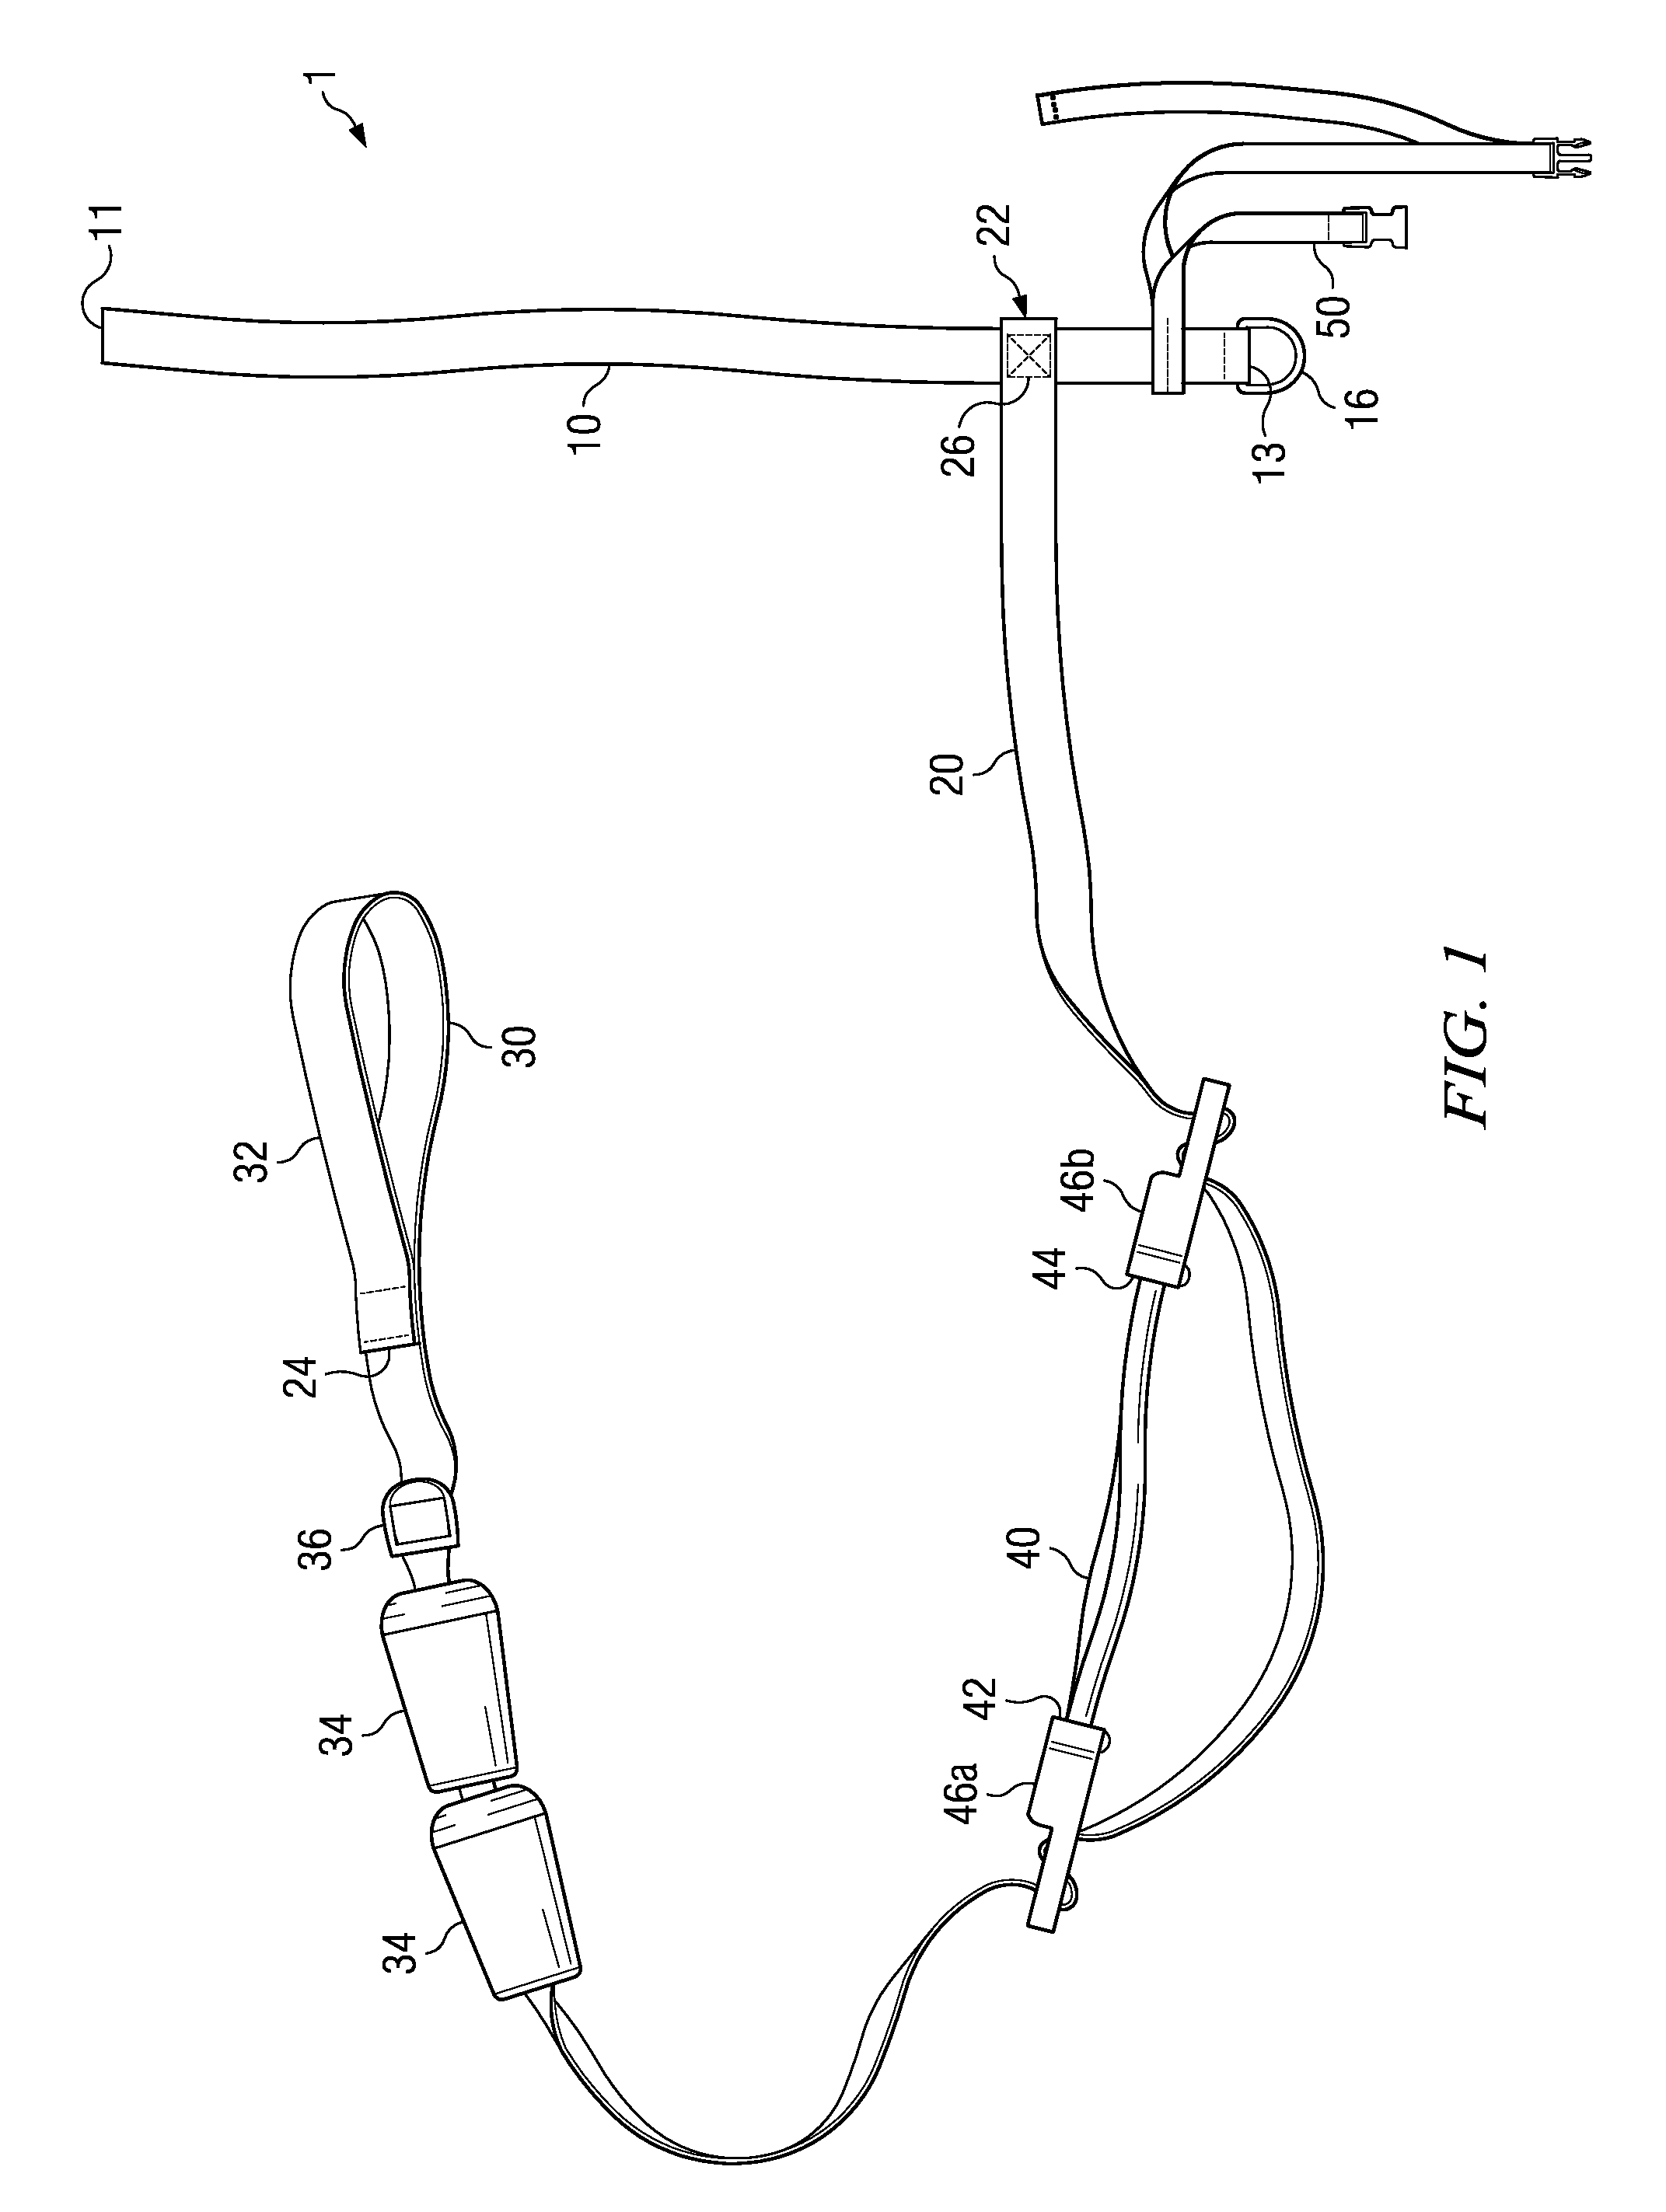 Foot and Ankle Exercise Device